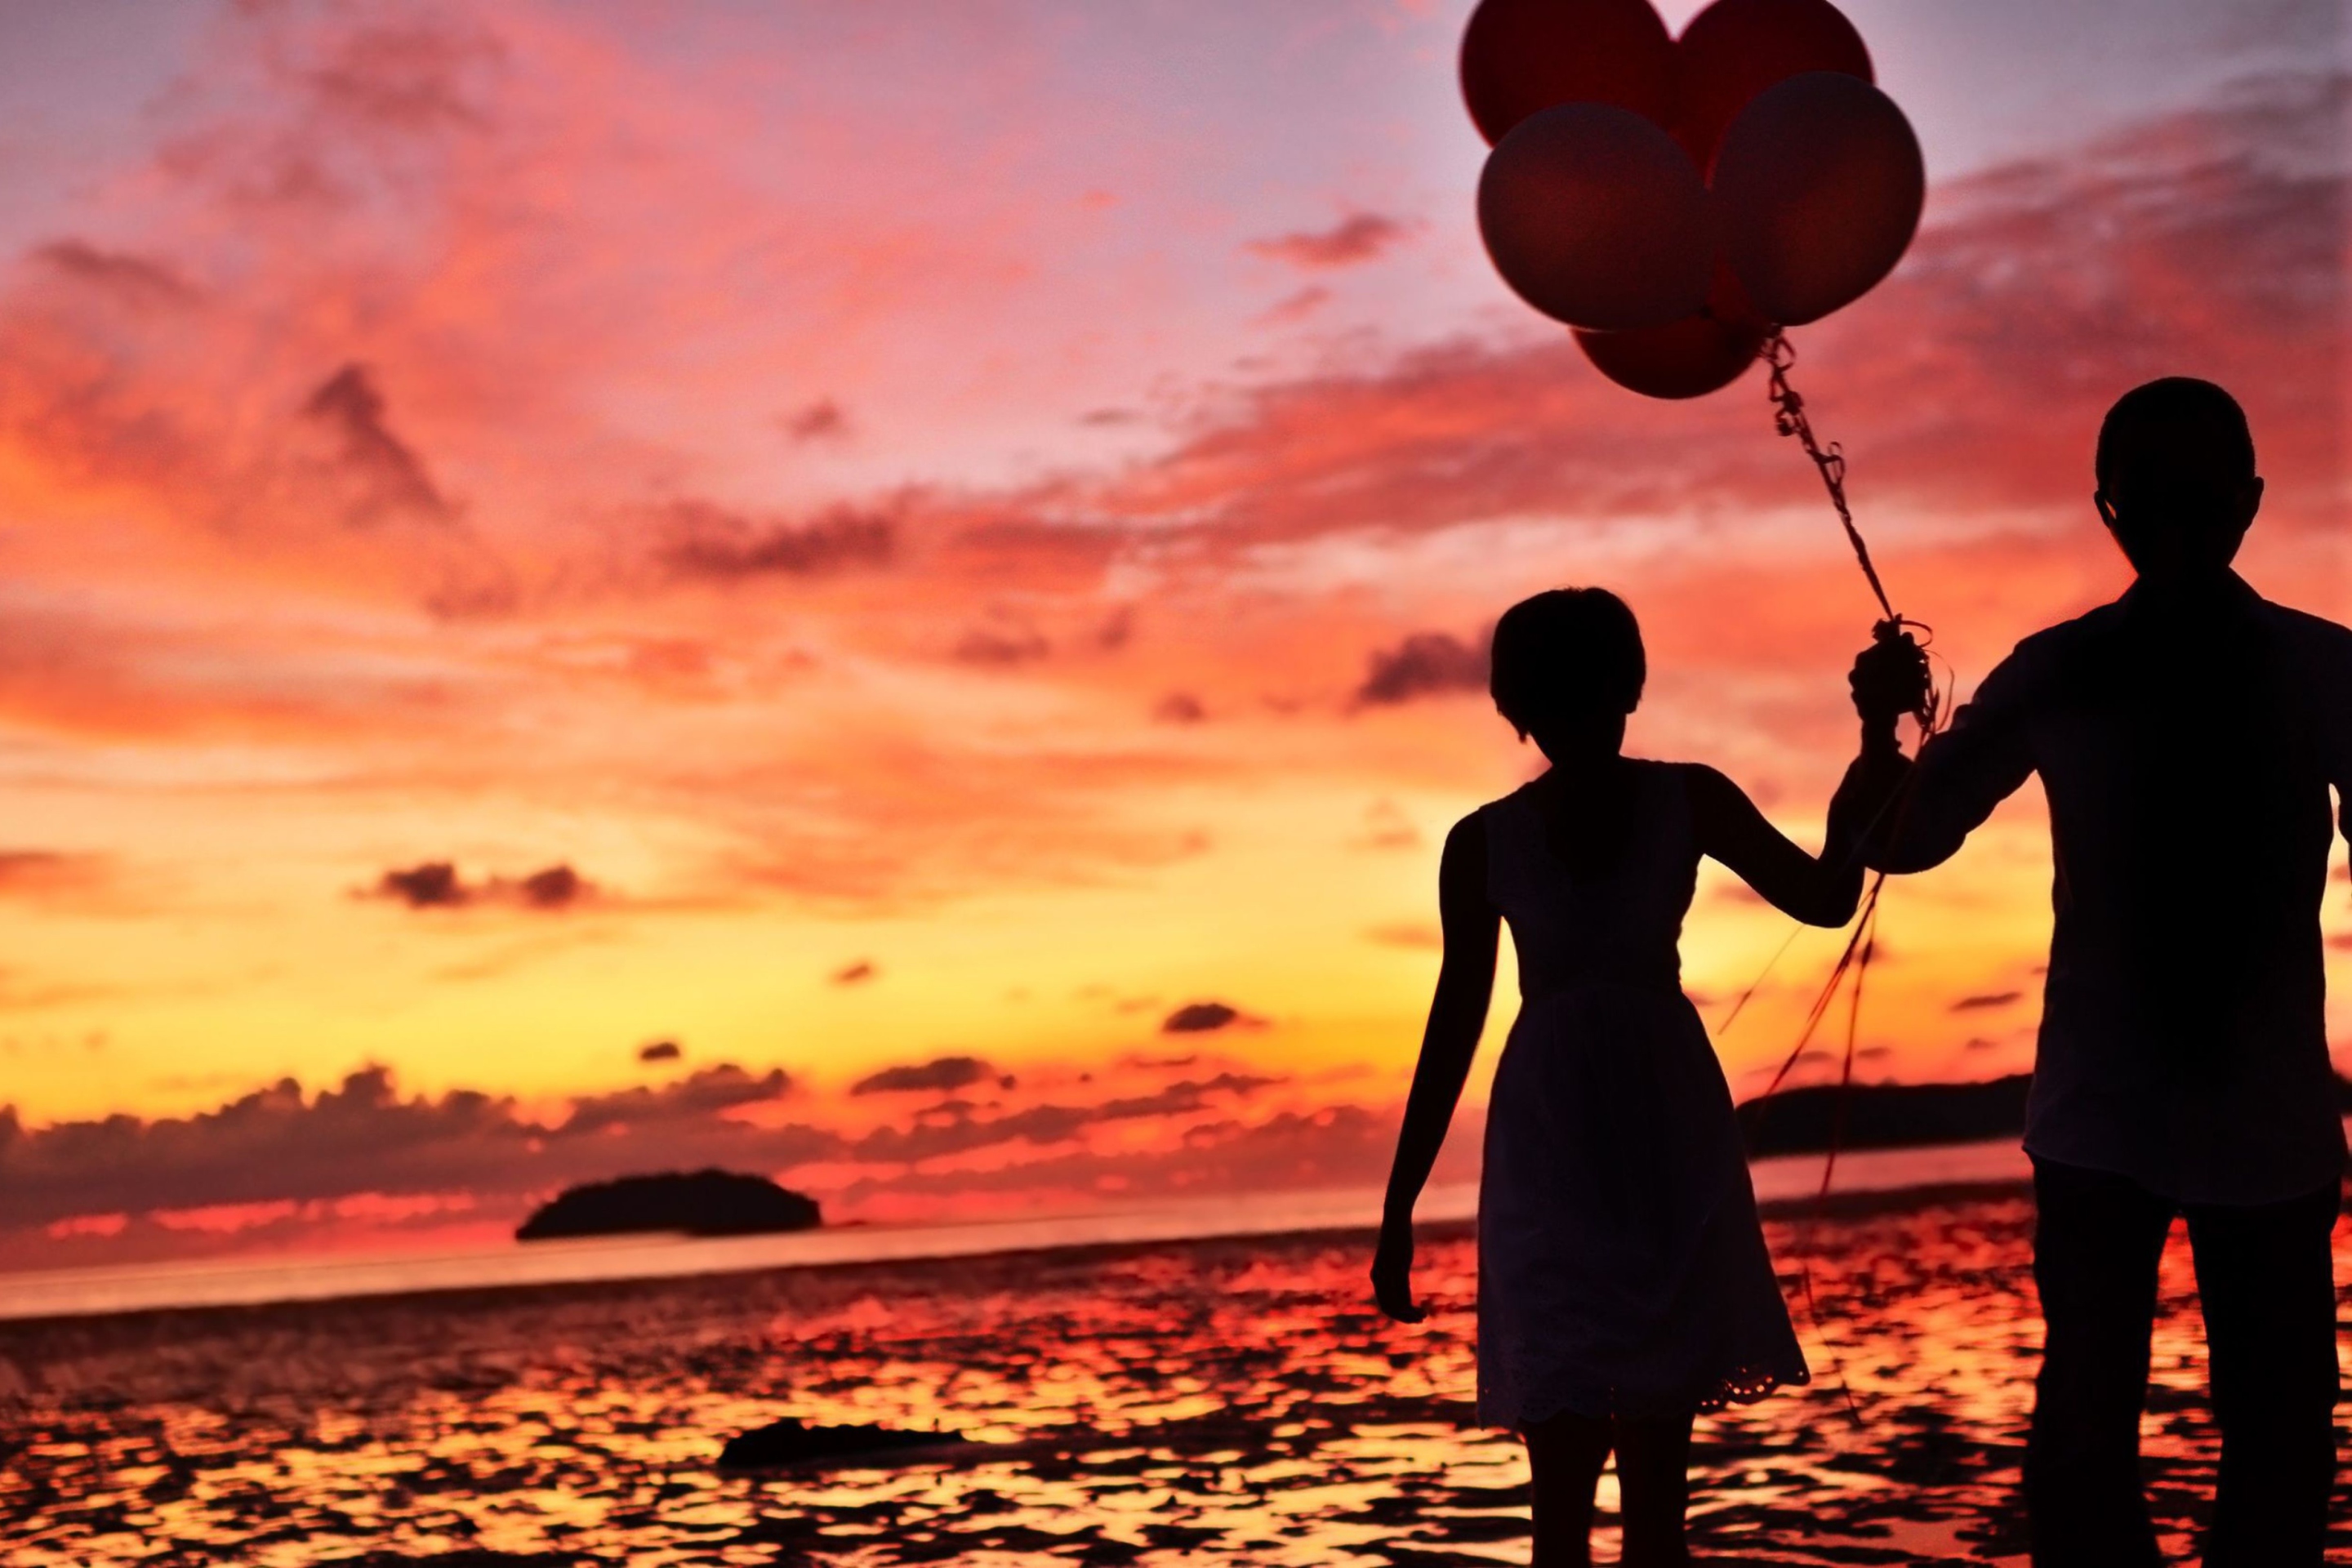 Couple With Balloons Silhouette At Sunset screenshot #1 2880x1920